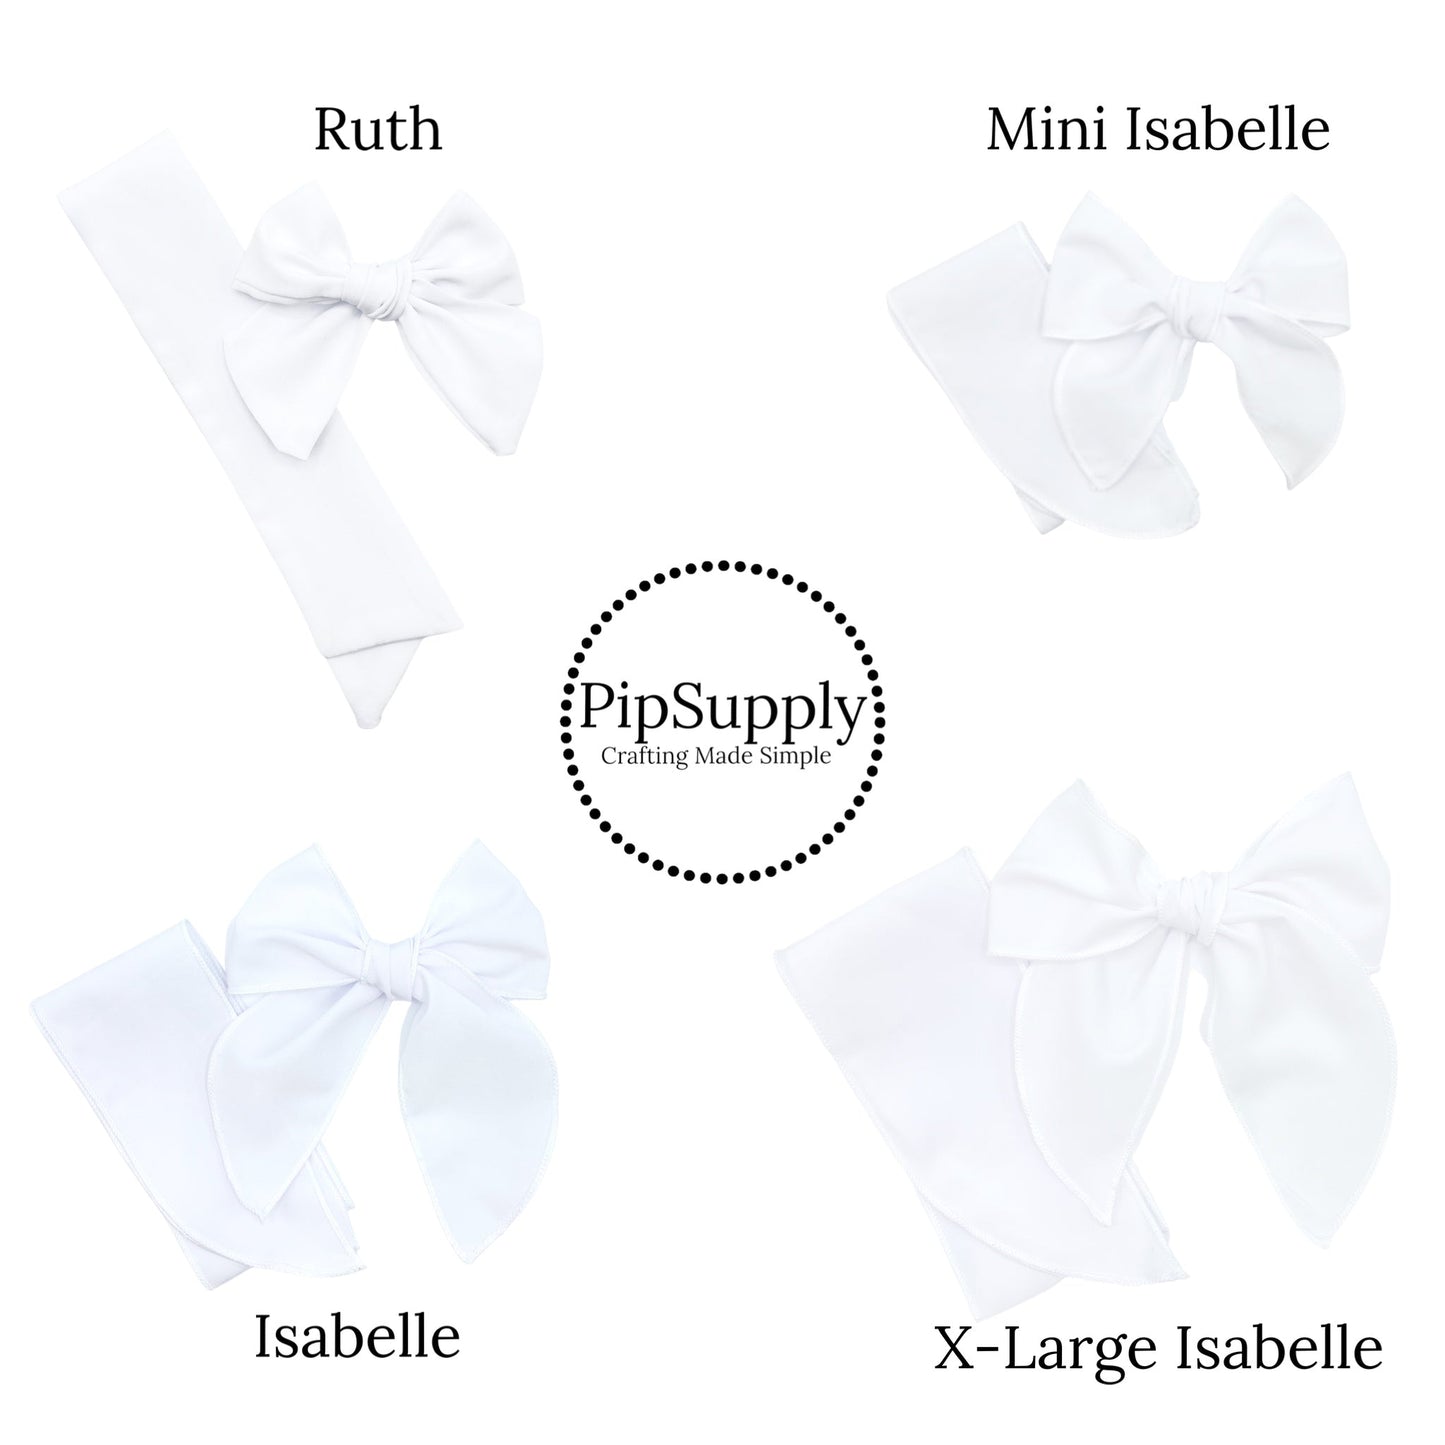 Black and White Composition Notebook Hair Bow Strips